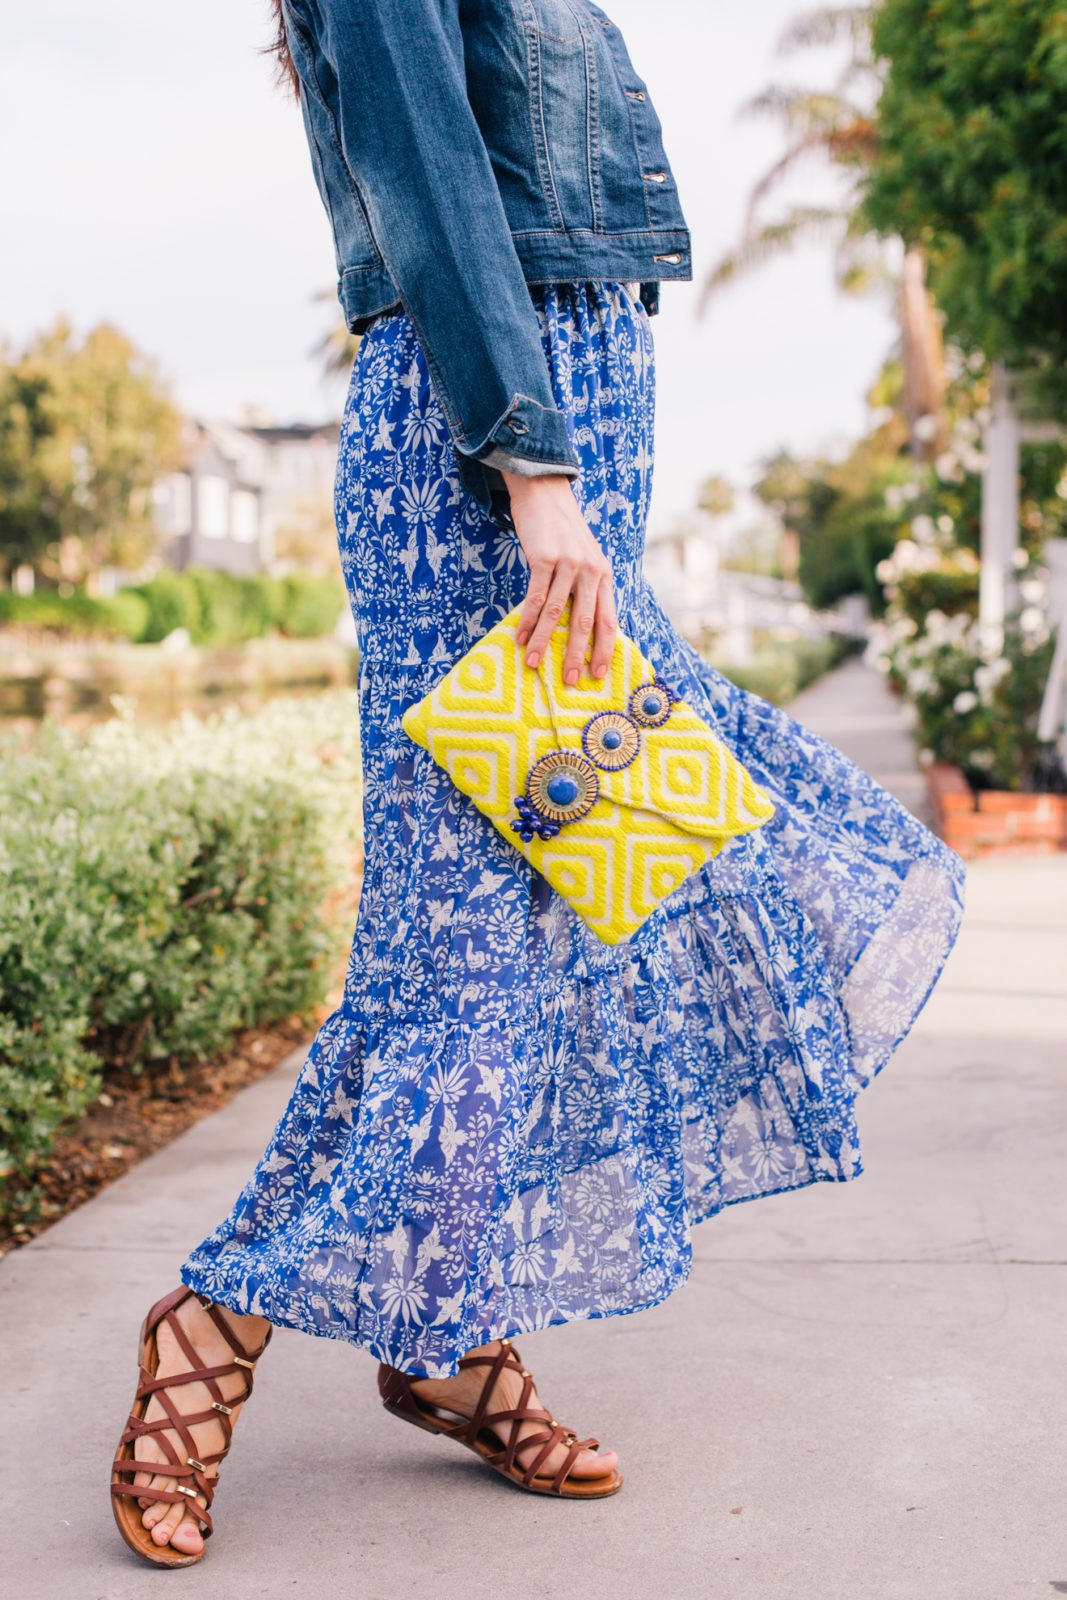 Stage Summer Moments, 2019 Summer Bucket List Moments by popular Los Angeles Lifestyle Blogger Laura Lily: image of woman at Venice, California canals wearing Stage Stores flowing blue and white floral maxi dress, brown gladiator sandals, cropped jean jacket and holding a bright yellow clutch 